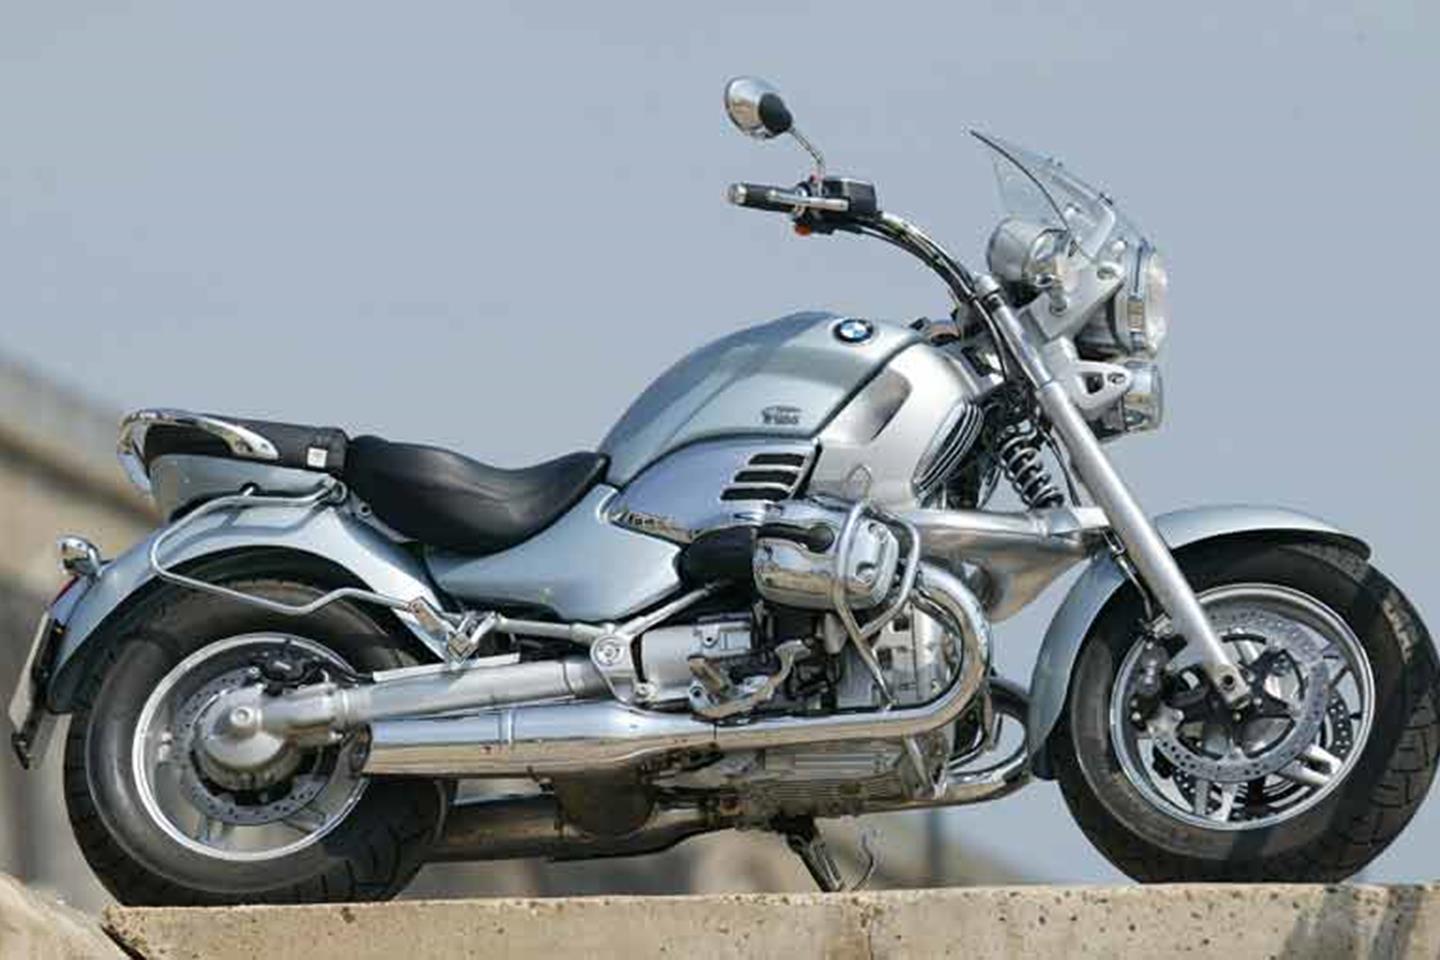 BMW R1200C (1997-2005) Review | Speed, Specs & Prices | MCN